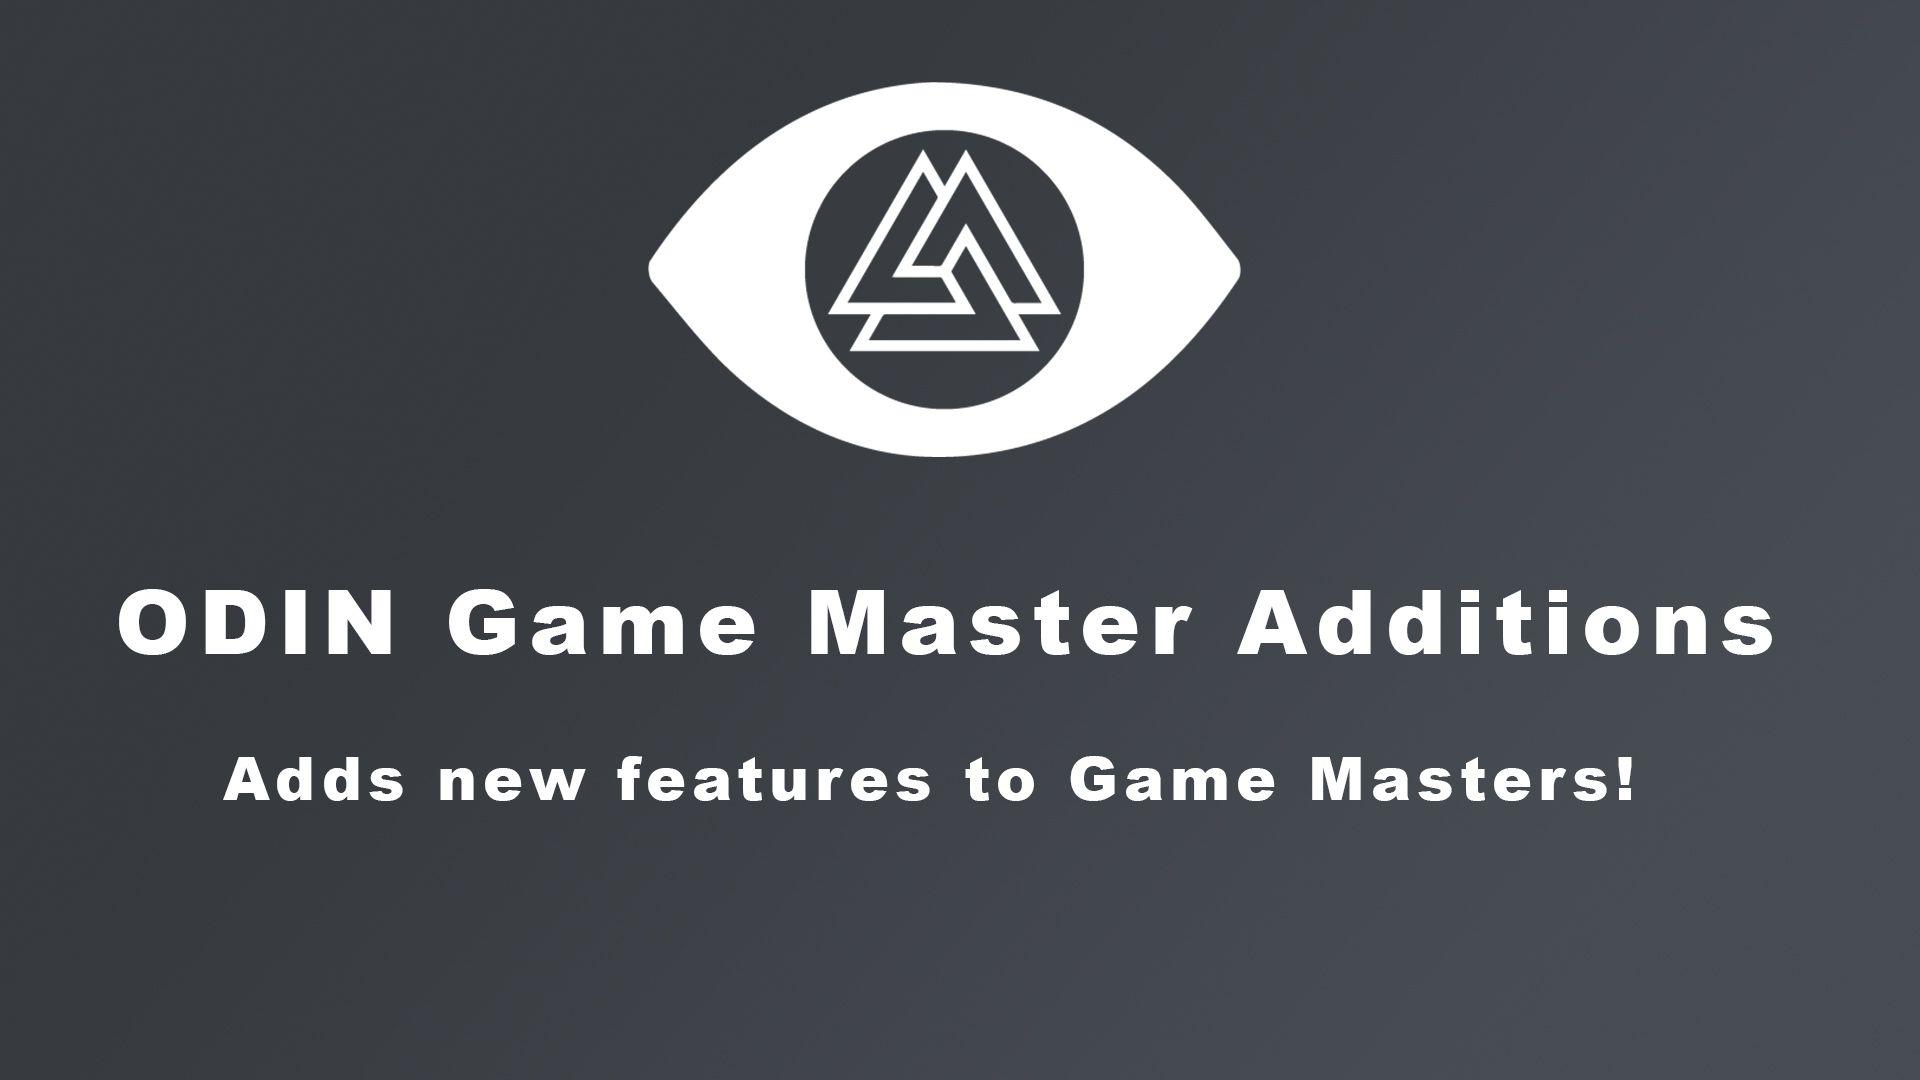 Odin Game Master Additions